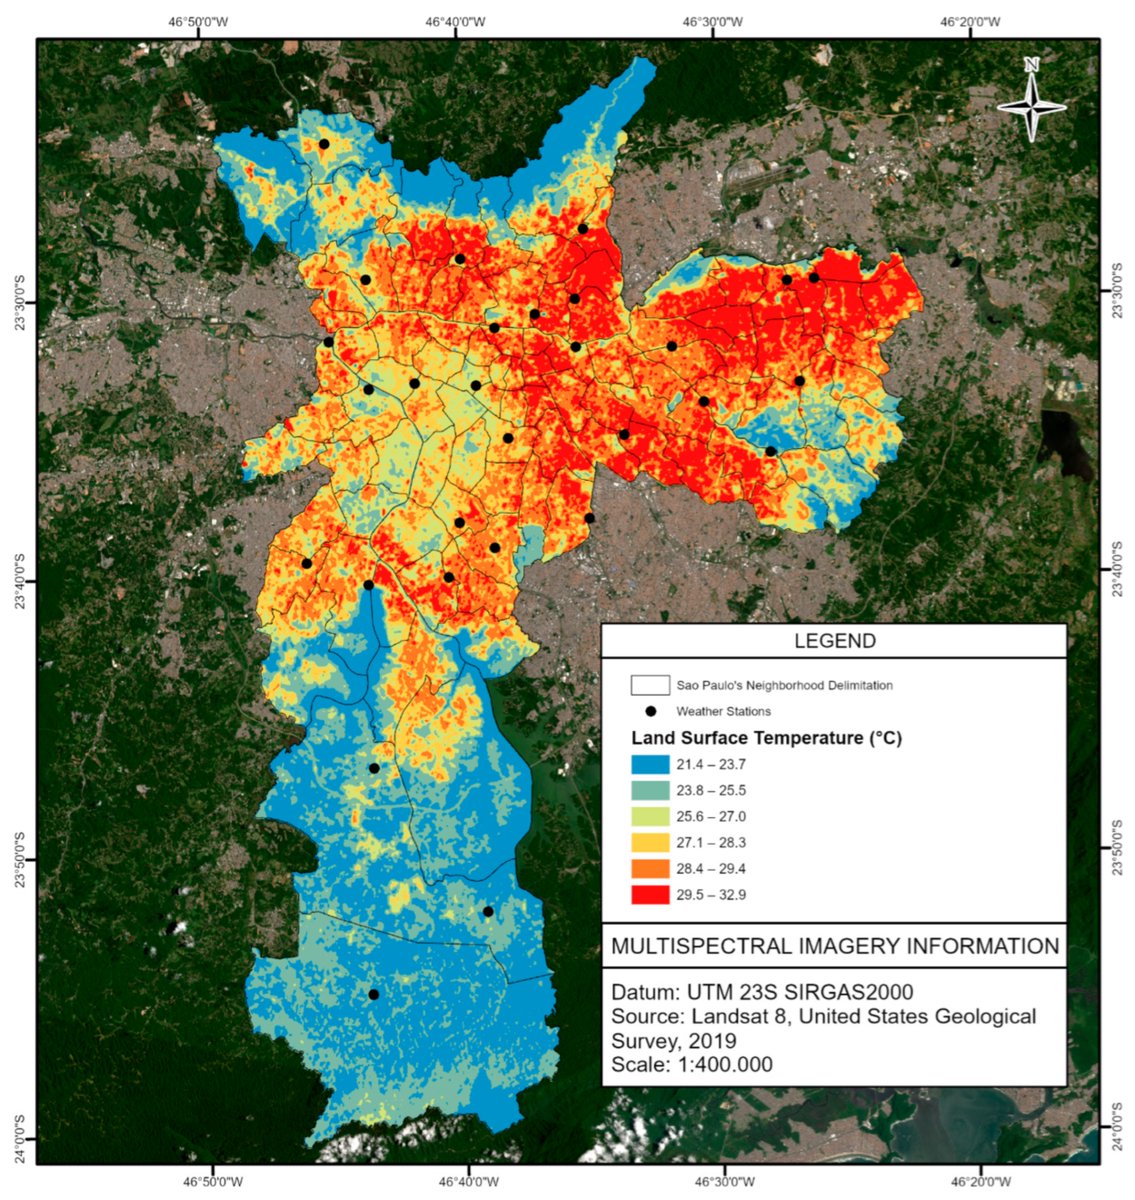 #EditorsChoiceArticle
🎉'Comparison between Air Temperature and Land Surface Temperature for the City of São Paulo, Brazil' by Timothy J. Wallington et al. 
@UiB @UFSM_oficial
#atmosphere #heat_island #remote_sensing
👉mdpi.com/2073-4433/13/3…